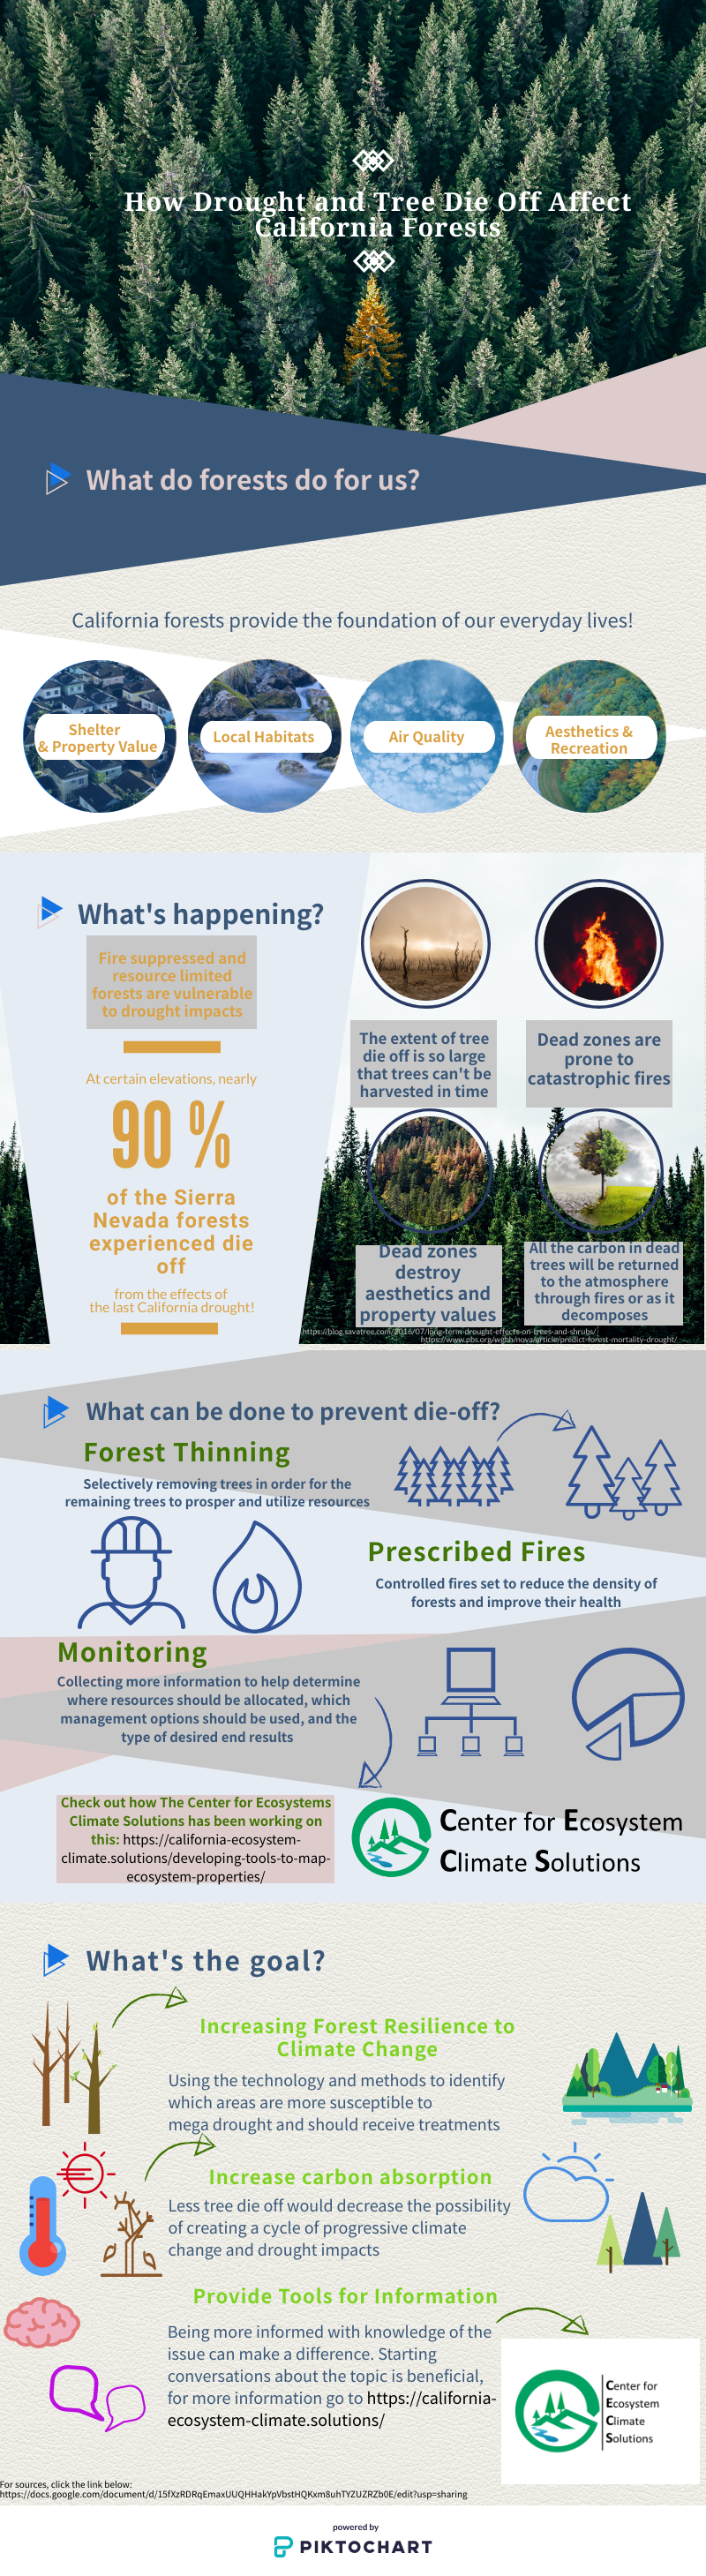 Forest Die-Off and Management - California Ecosystem Climate Solutions